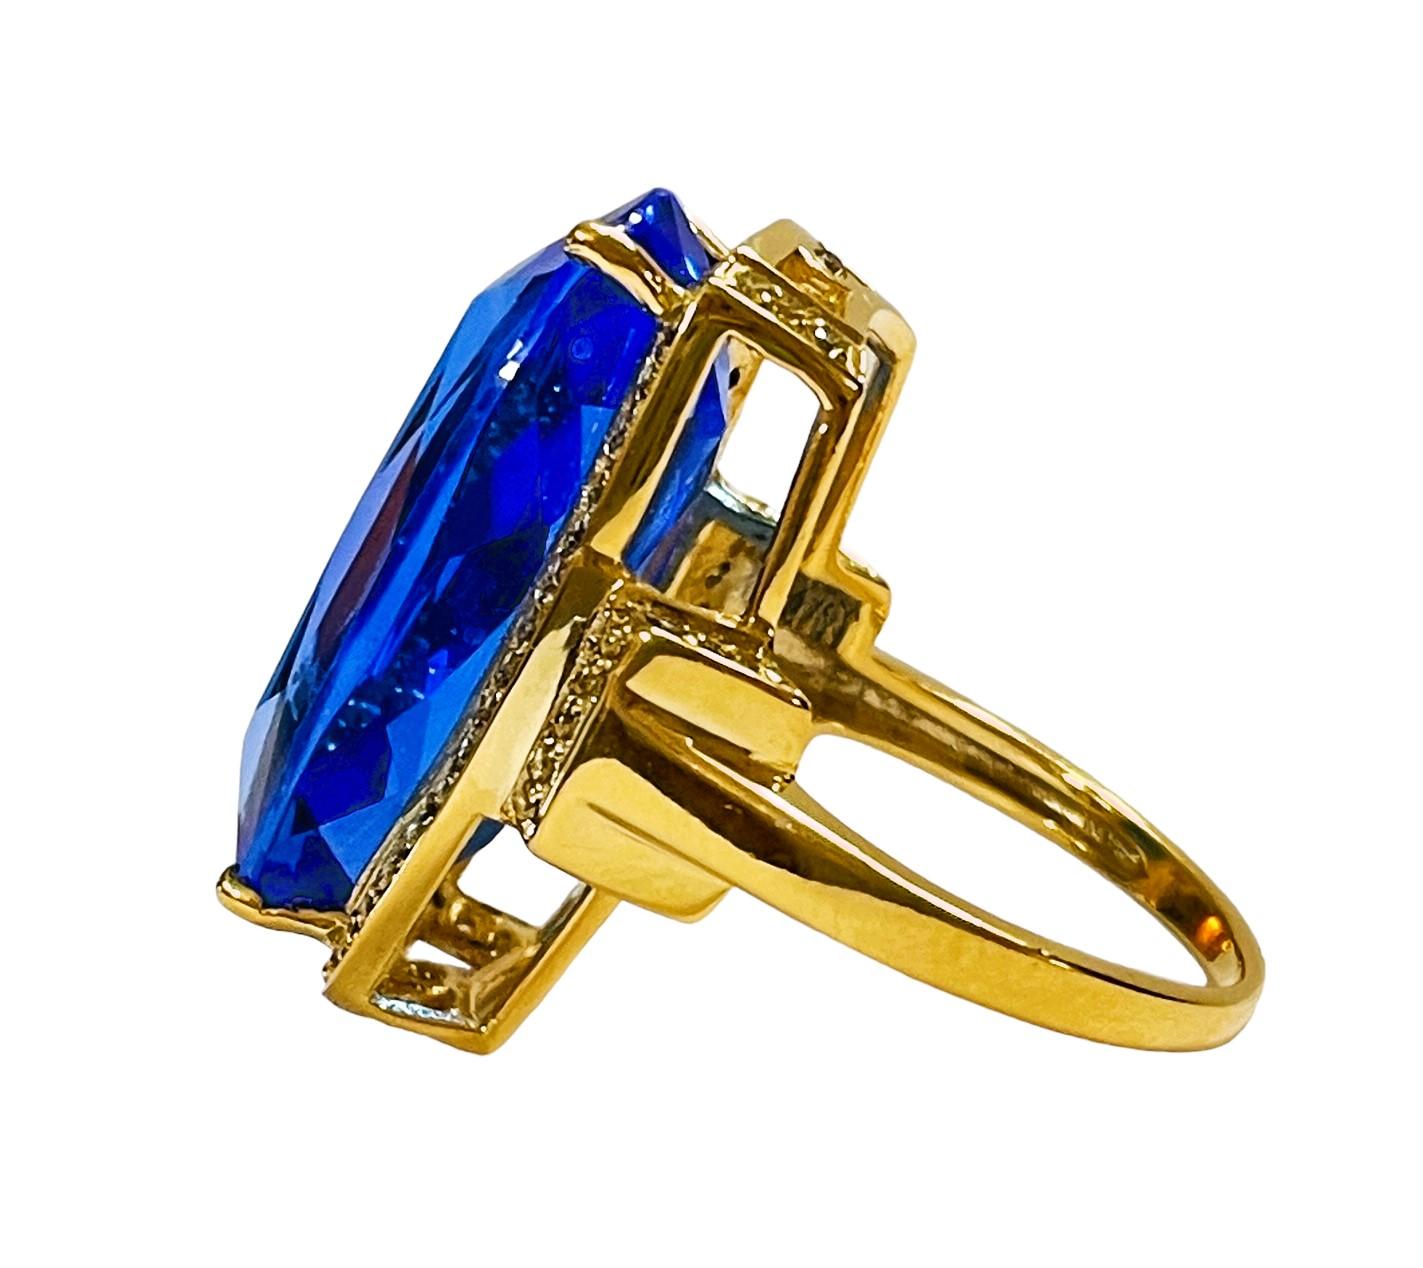 Art Deco New 16.90 Carat Royal Blue Spinel & White Sapphire YGold Plated Sterling Ring